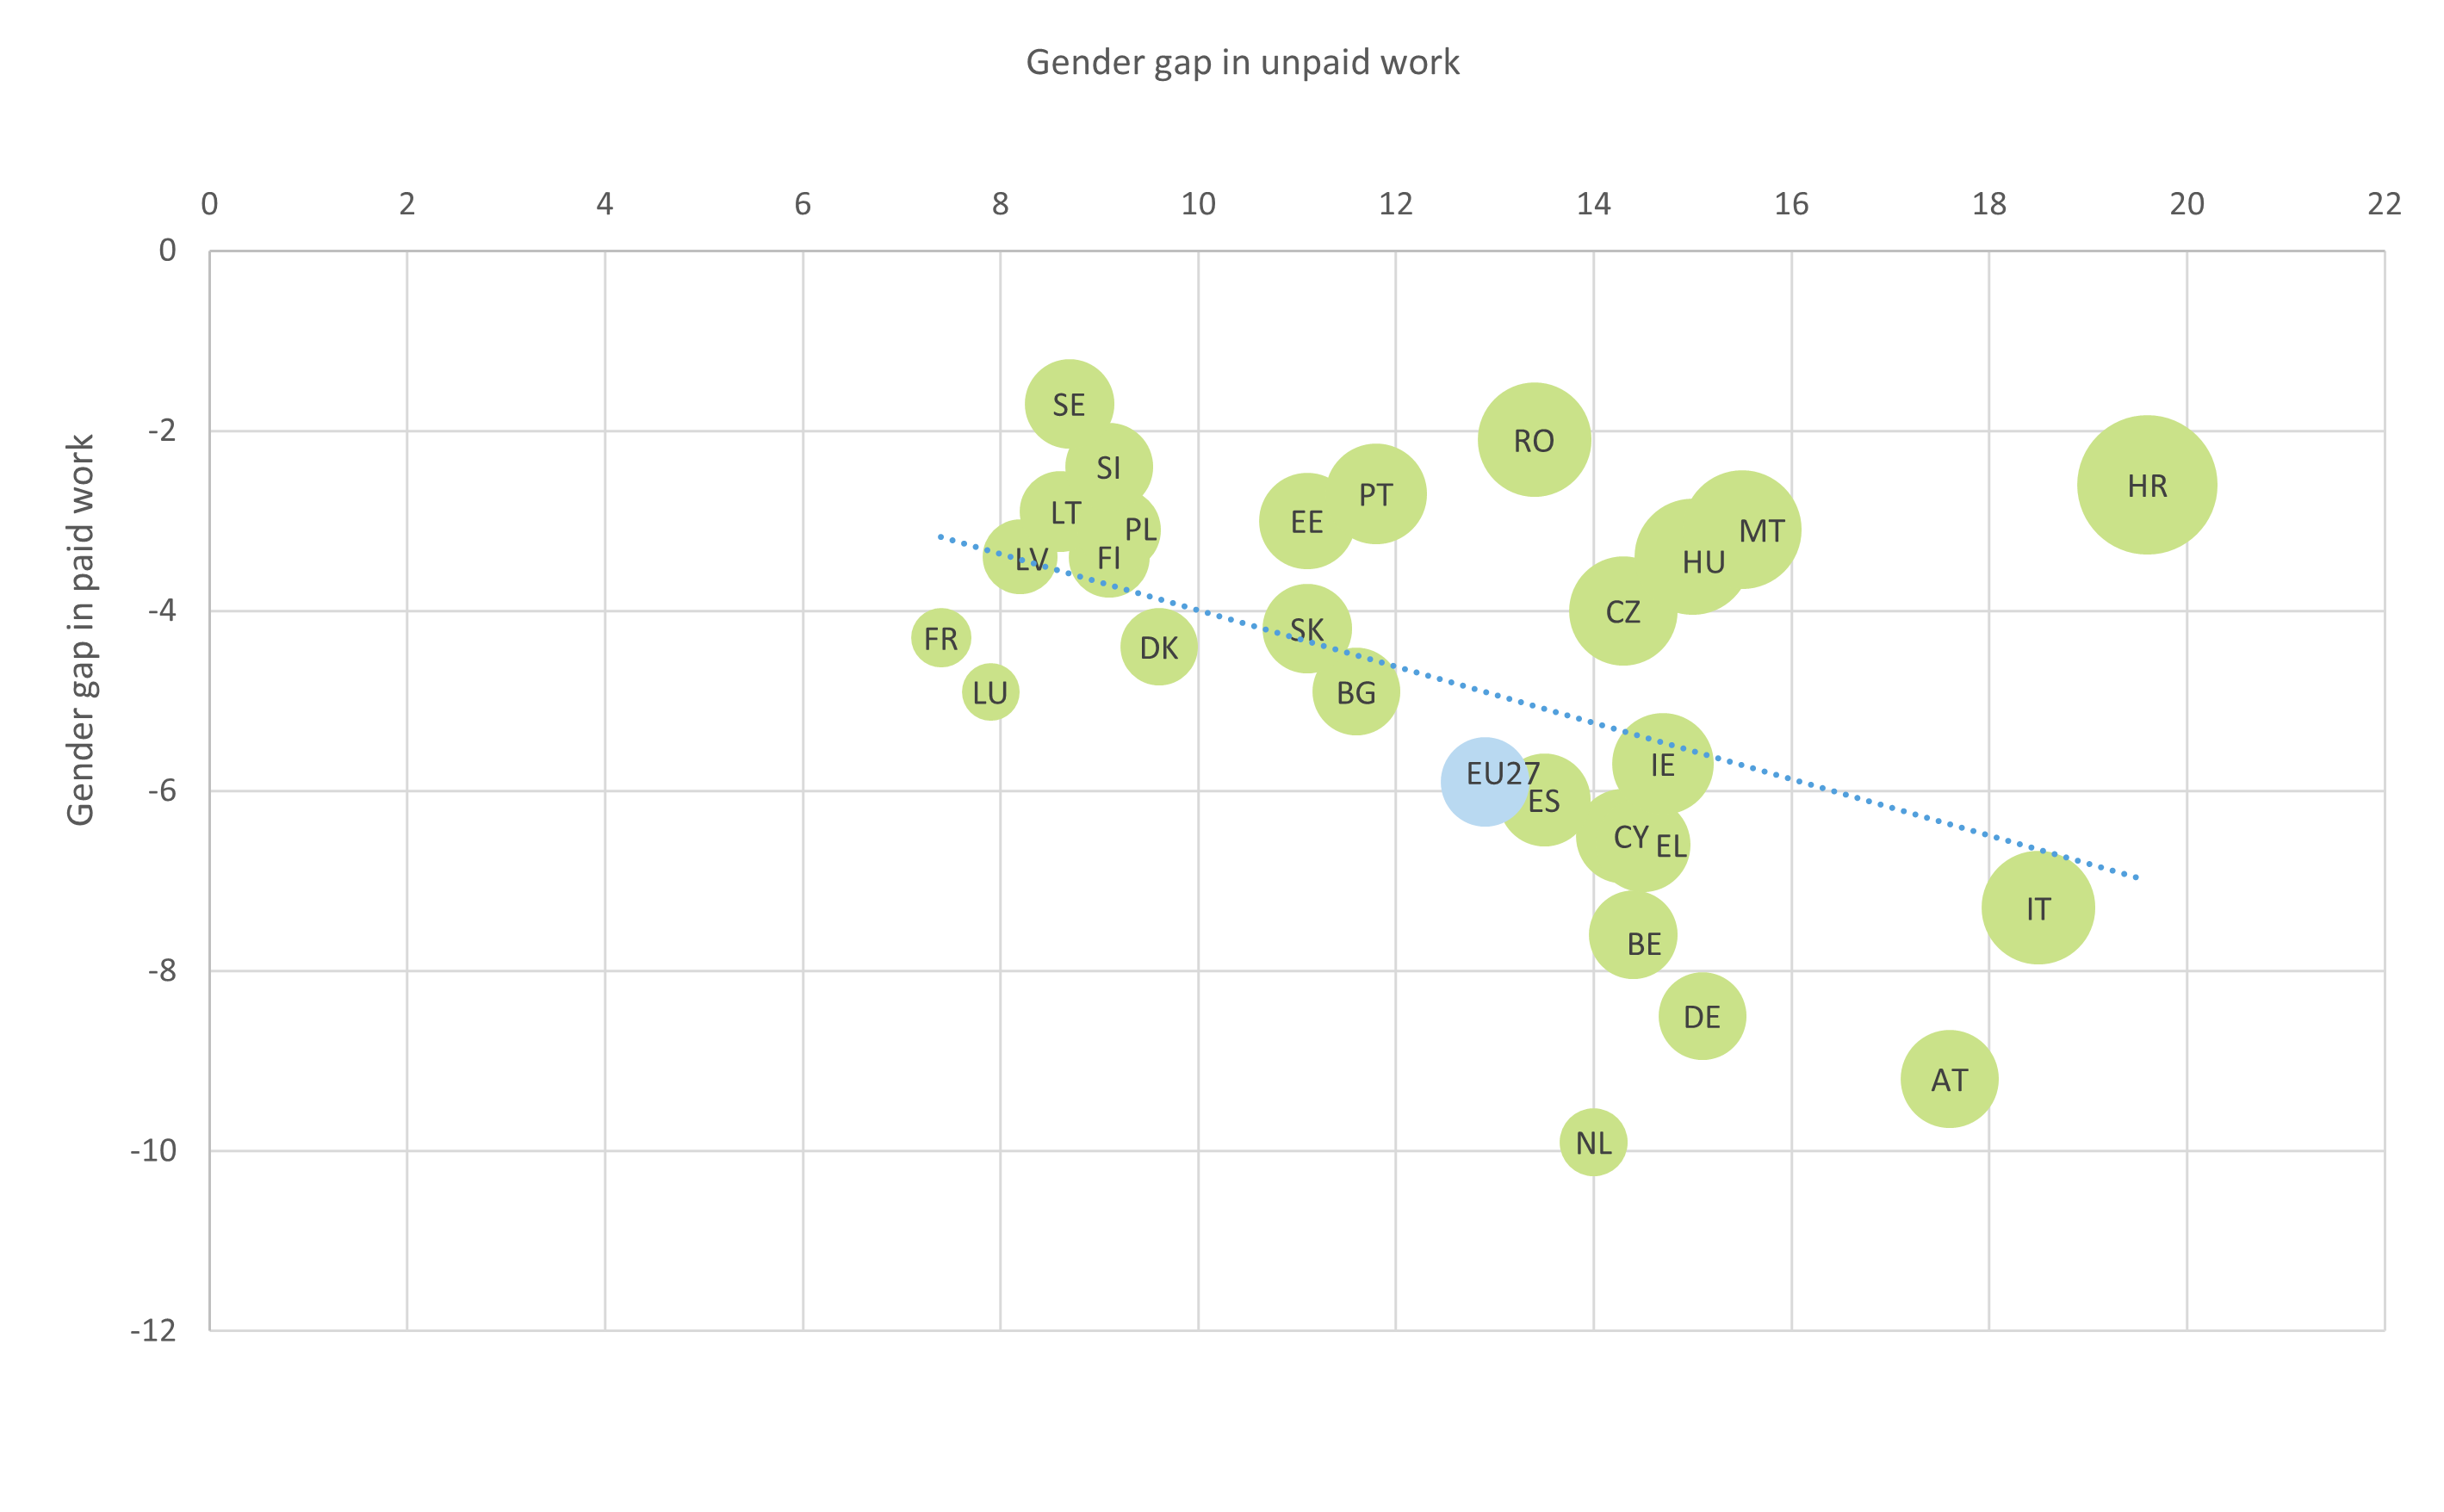 Figure 1: Gender gaps in weekly paid, unpaid and total working hours, EU Member States (weekly hours). While there are many differences in paid and unpaid work between Member States – for example, the difference in total hours ranged from 3 hours in Luxembourg and France to 17 hours in Croatia – the countries with smaller gender gaps in paid work also had smaller gaps in unpaid work, with the clear exception of Croatia.